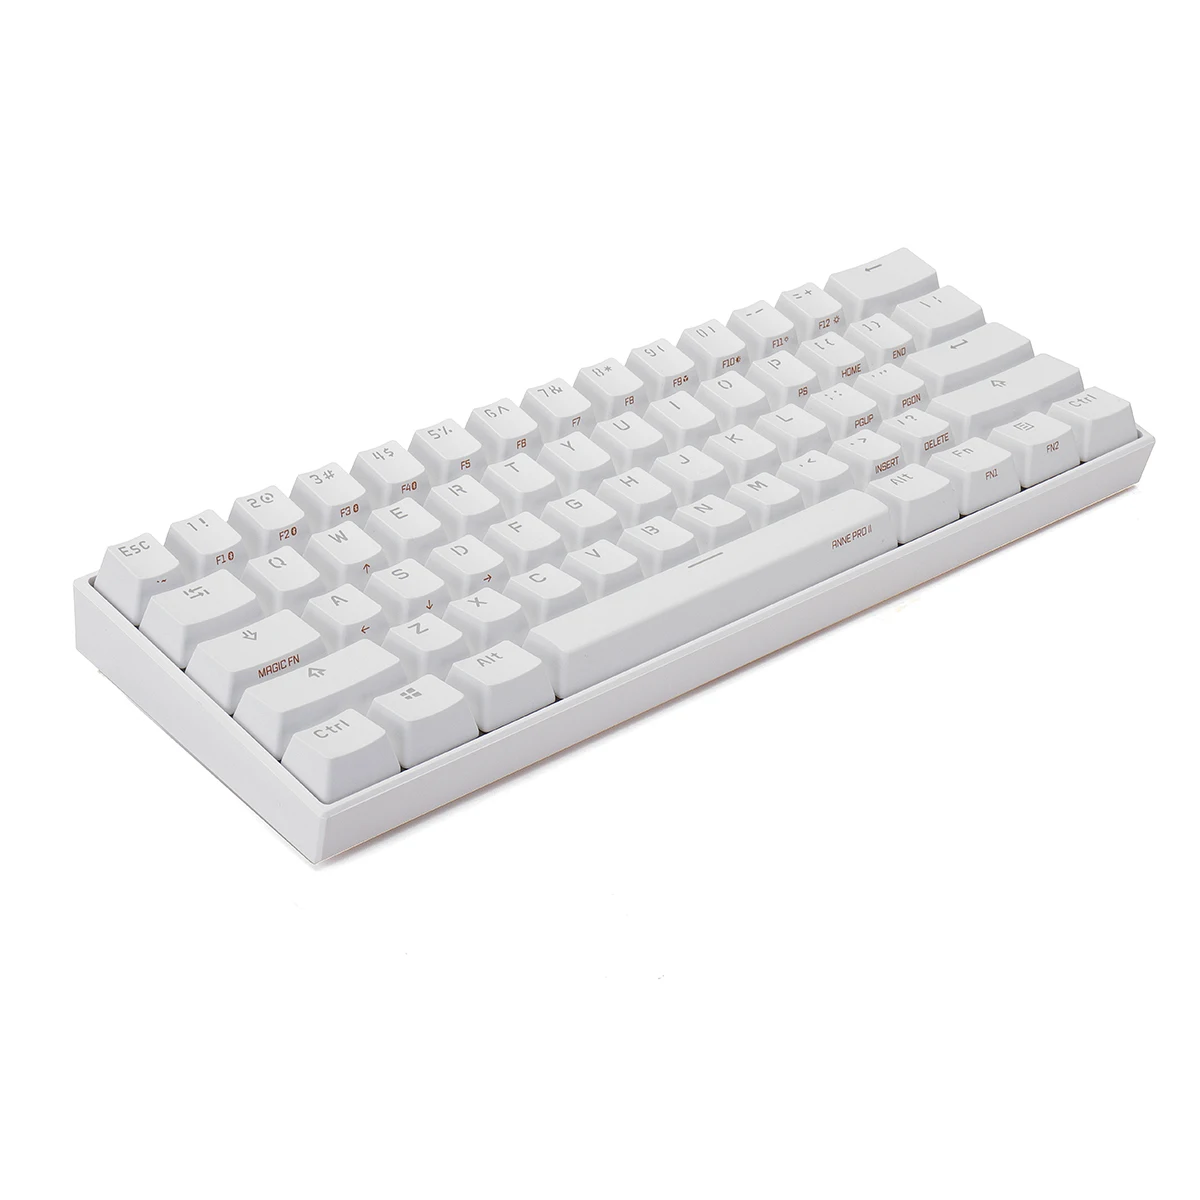 

ANNE Pro2 Mini Portable Wireless bluetooth 60% Mechanical Keyboard Red Blue Brown Switch Gaming Keyboard Detachable Cable hot